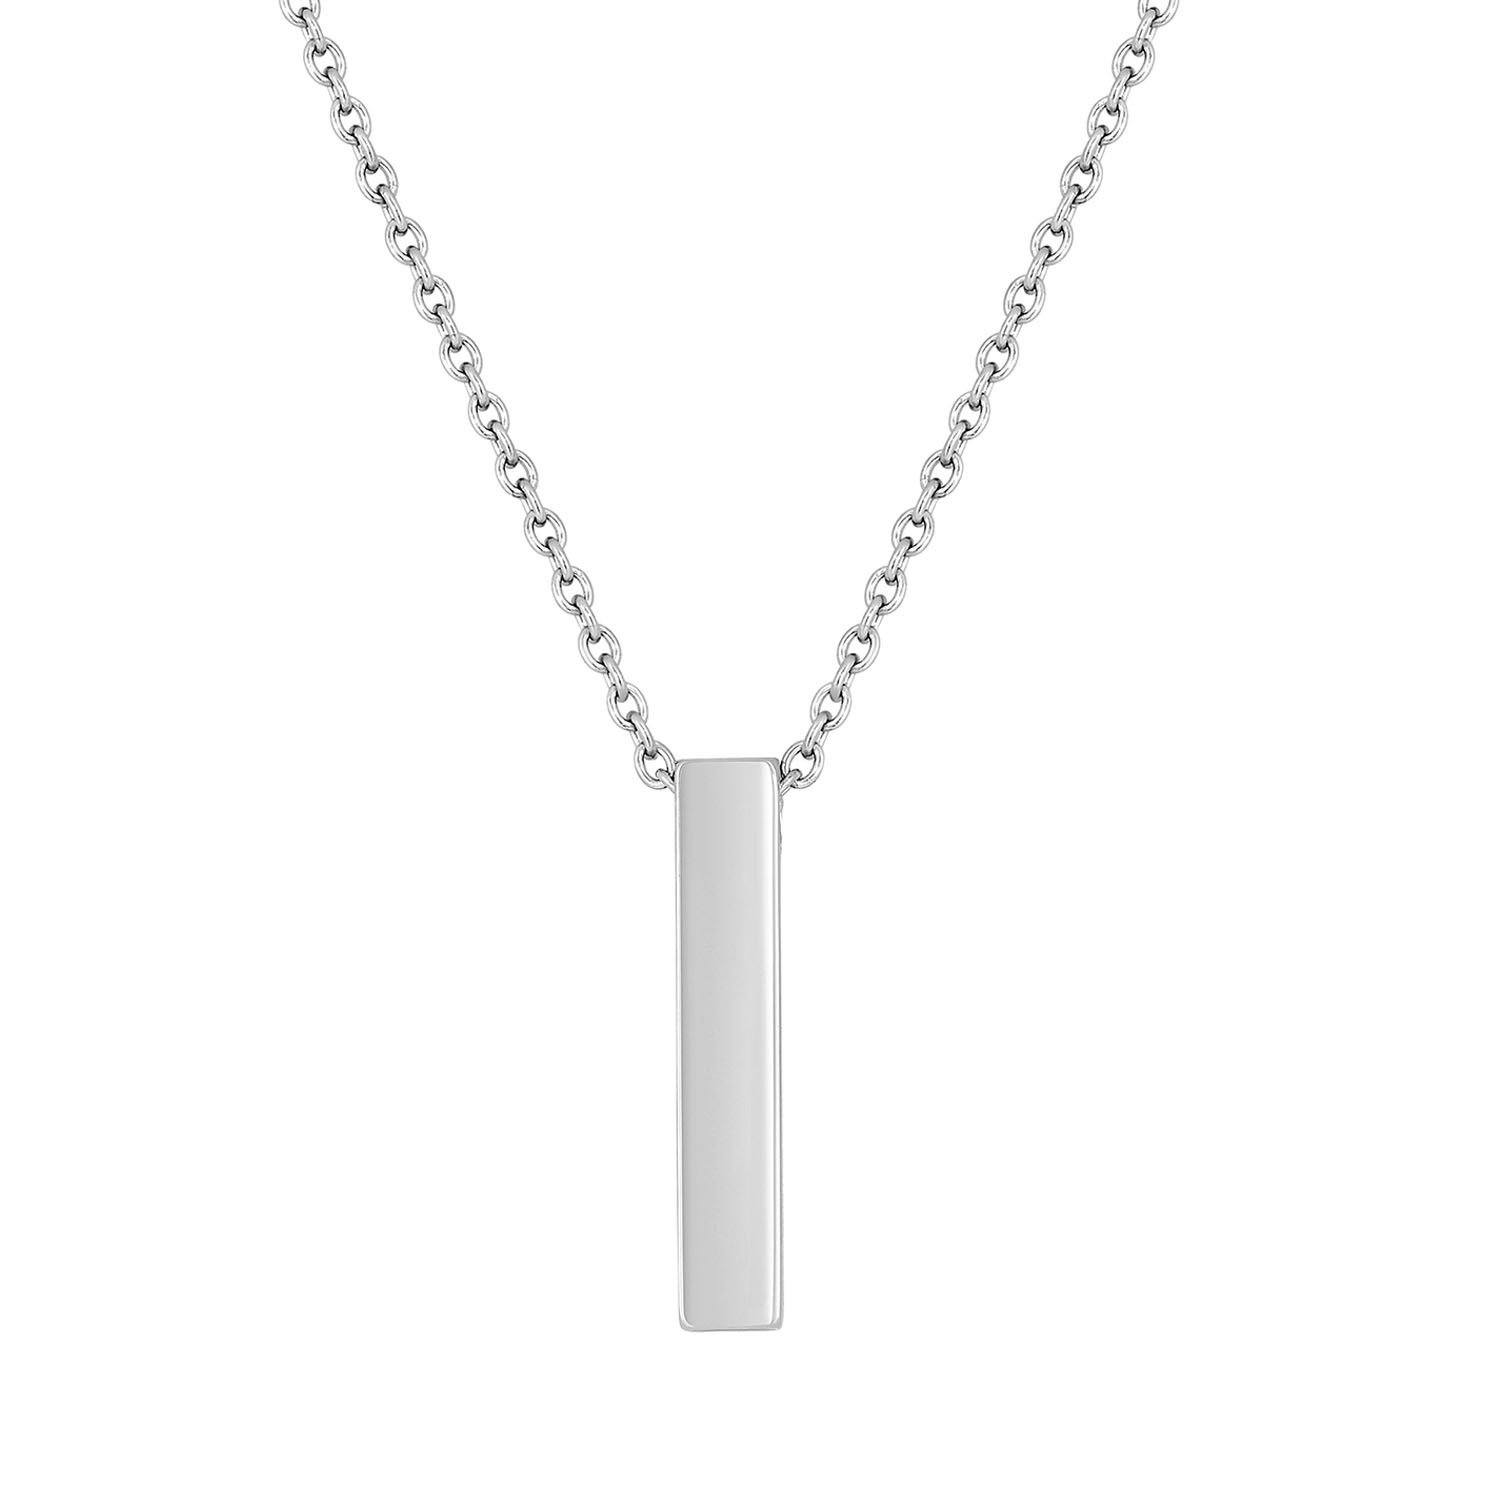 Cremation Jewelry Necklace for Ashes - Bar Pendant